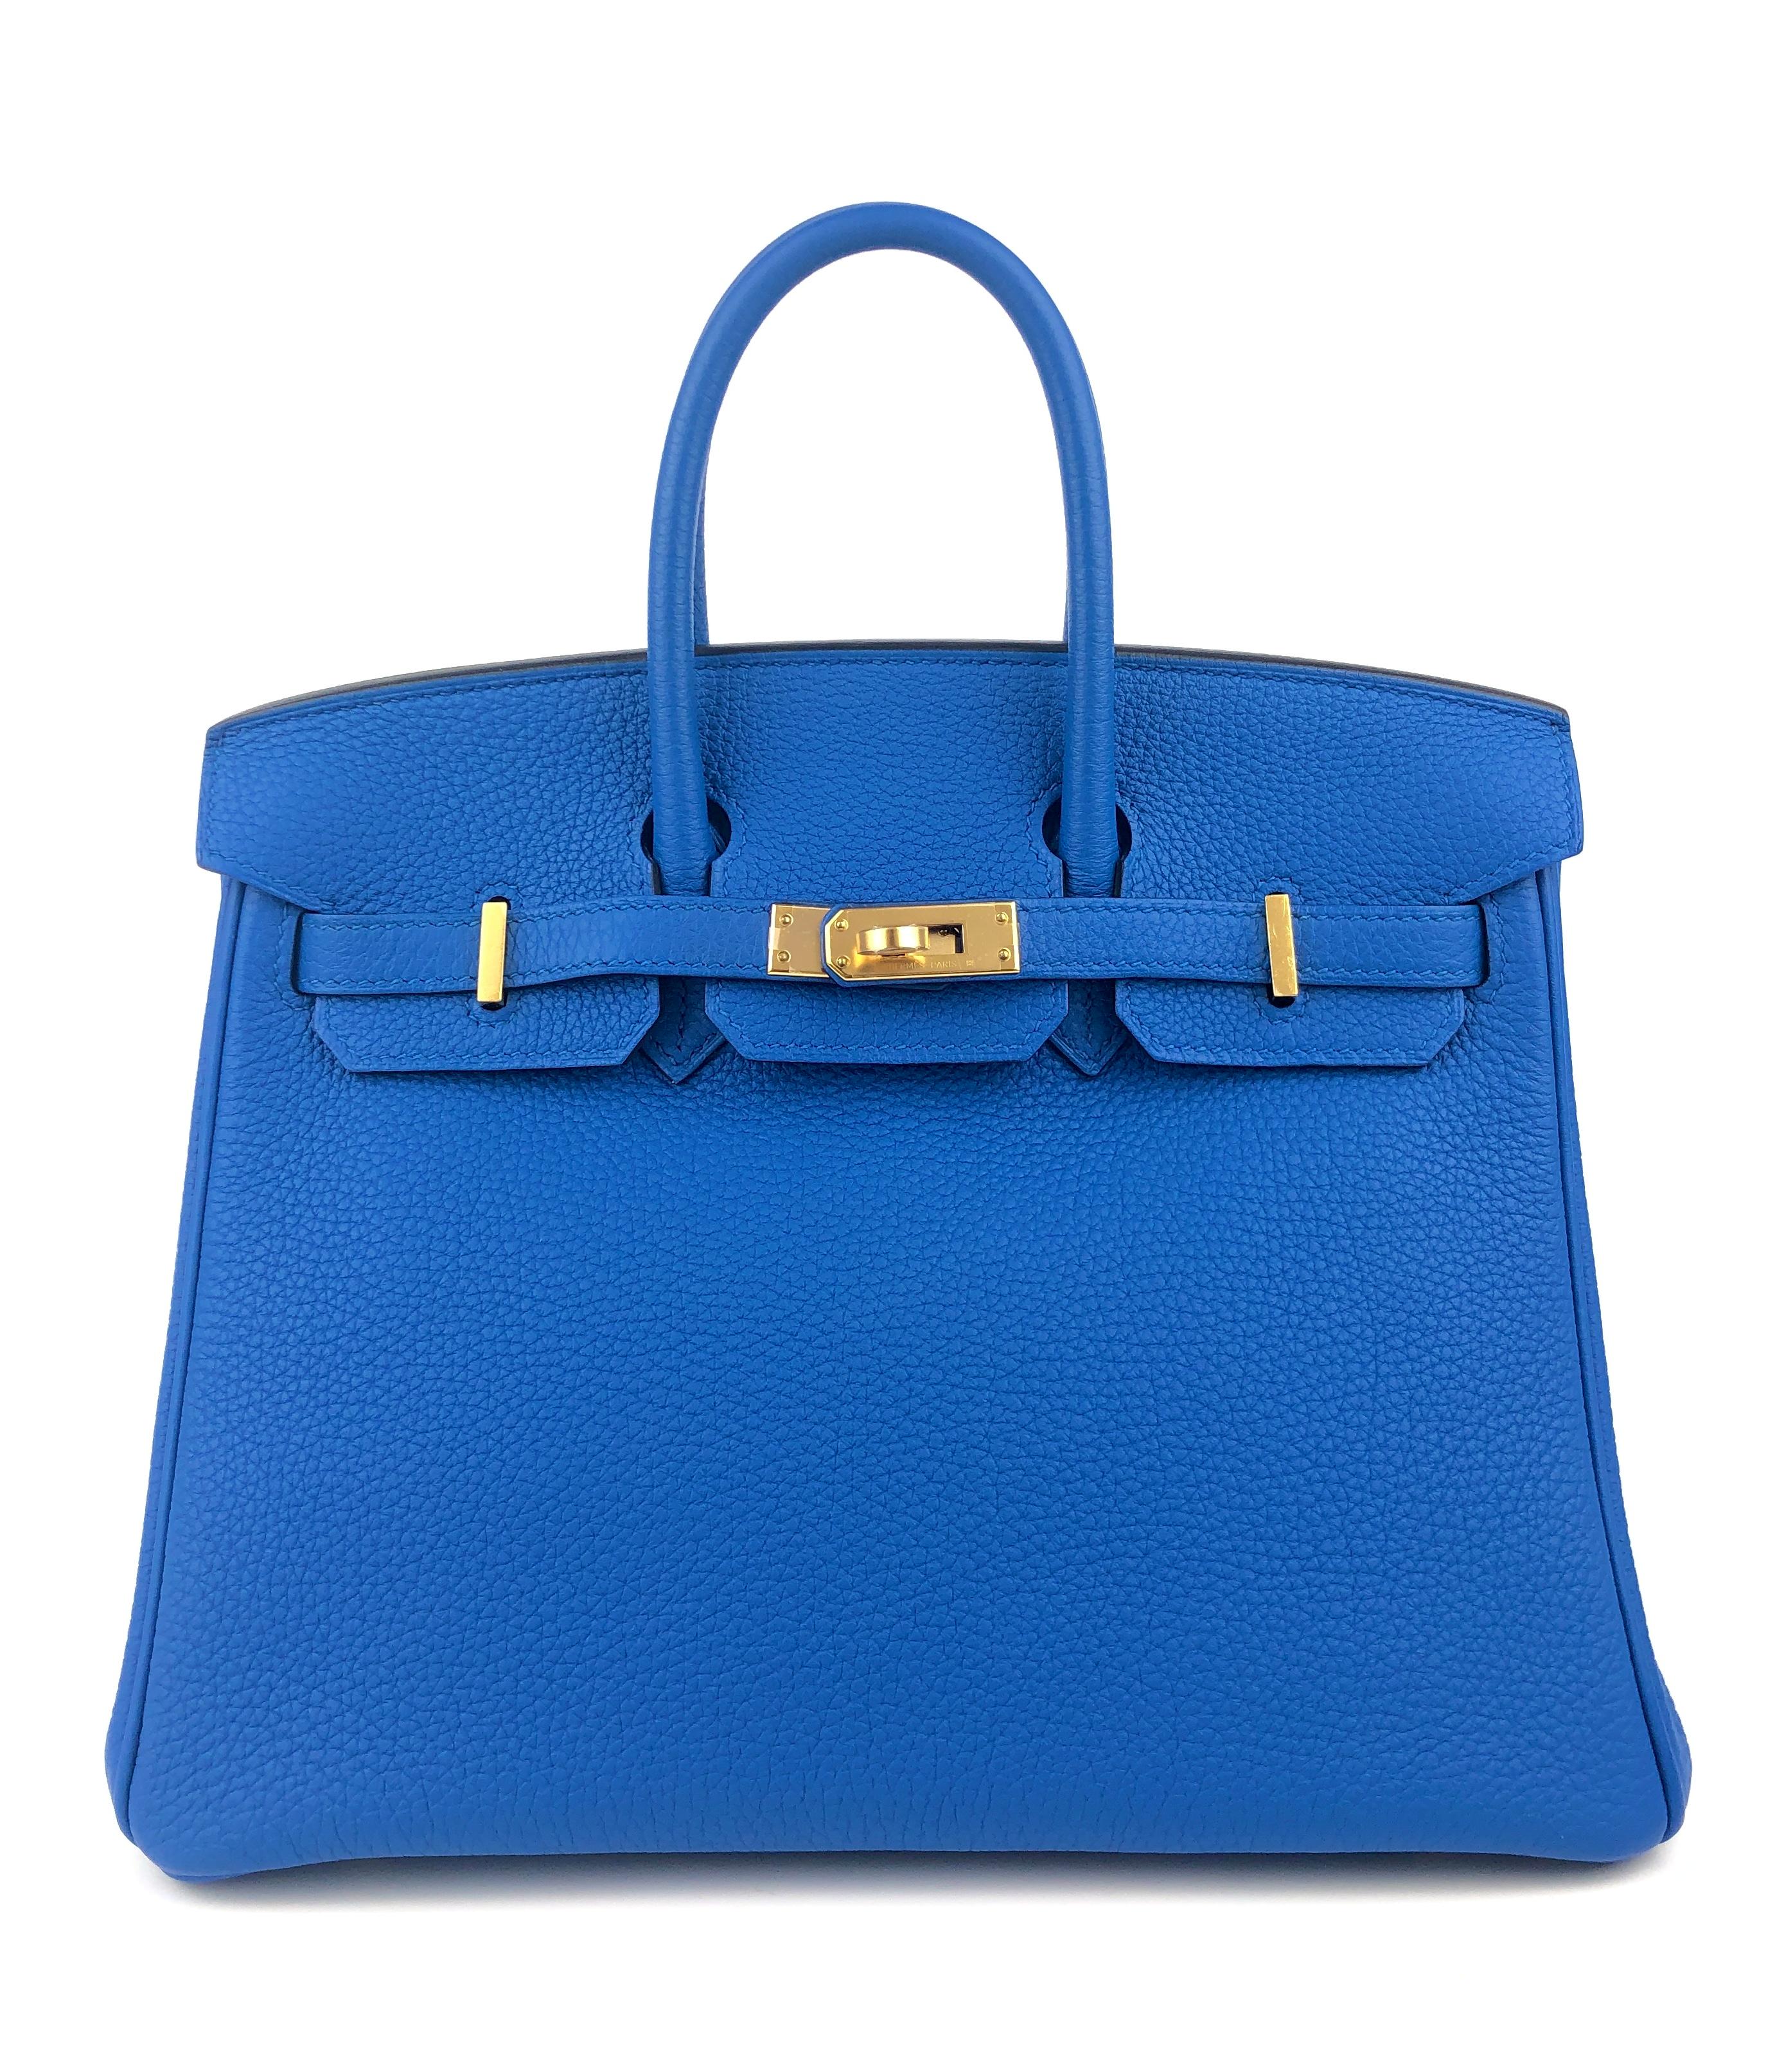 Absolutely Stunning Pristine Hermes Birkin 25 Blue Zellige Togo Leather complimented by Gold Hardware. Pristine Condition Plastic on Hardware, excellent structure and corners. C Stamp 2018. 

Shop with Confidence from Lux Addicts. Authenticity